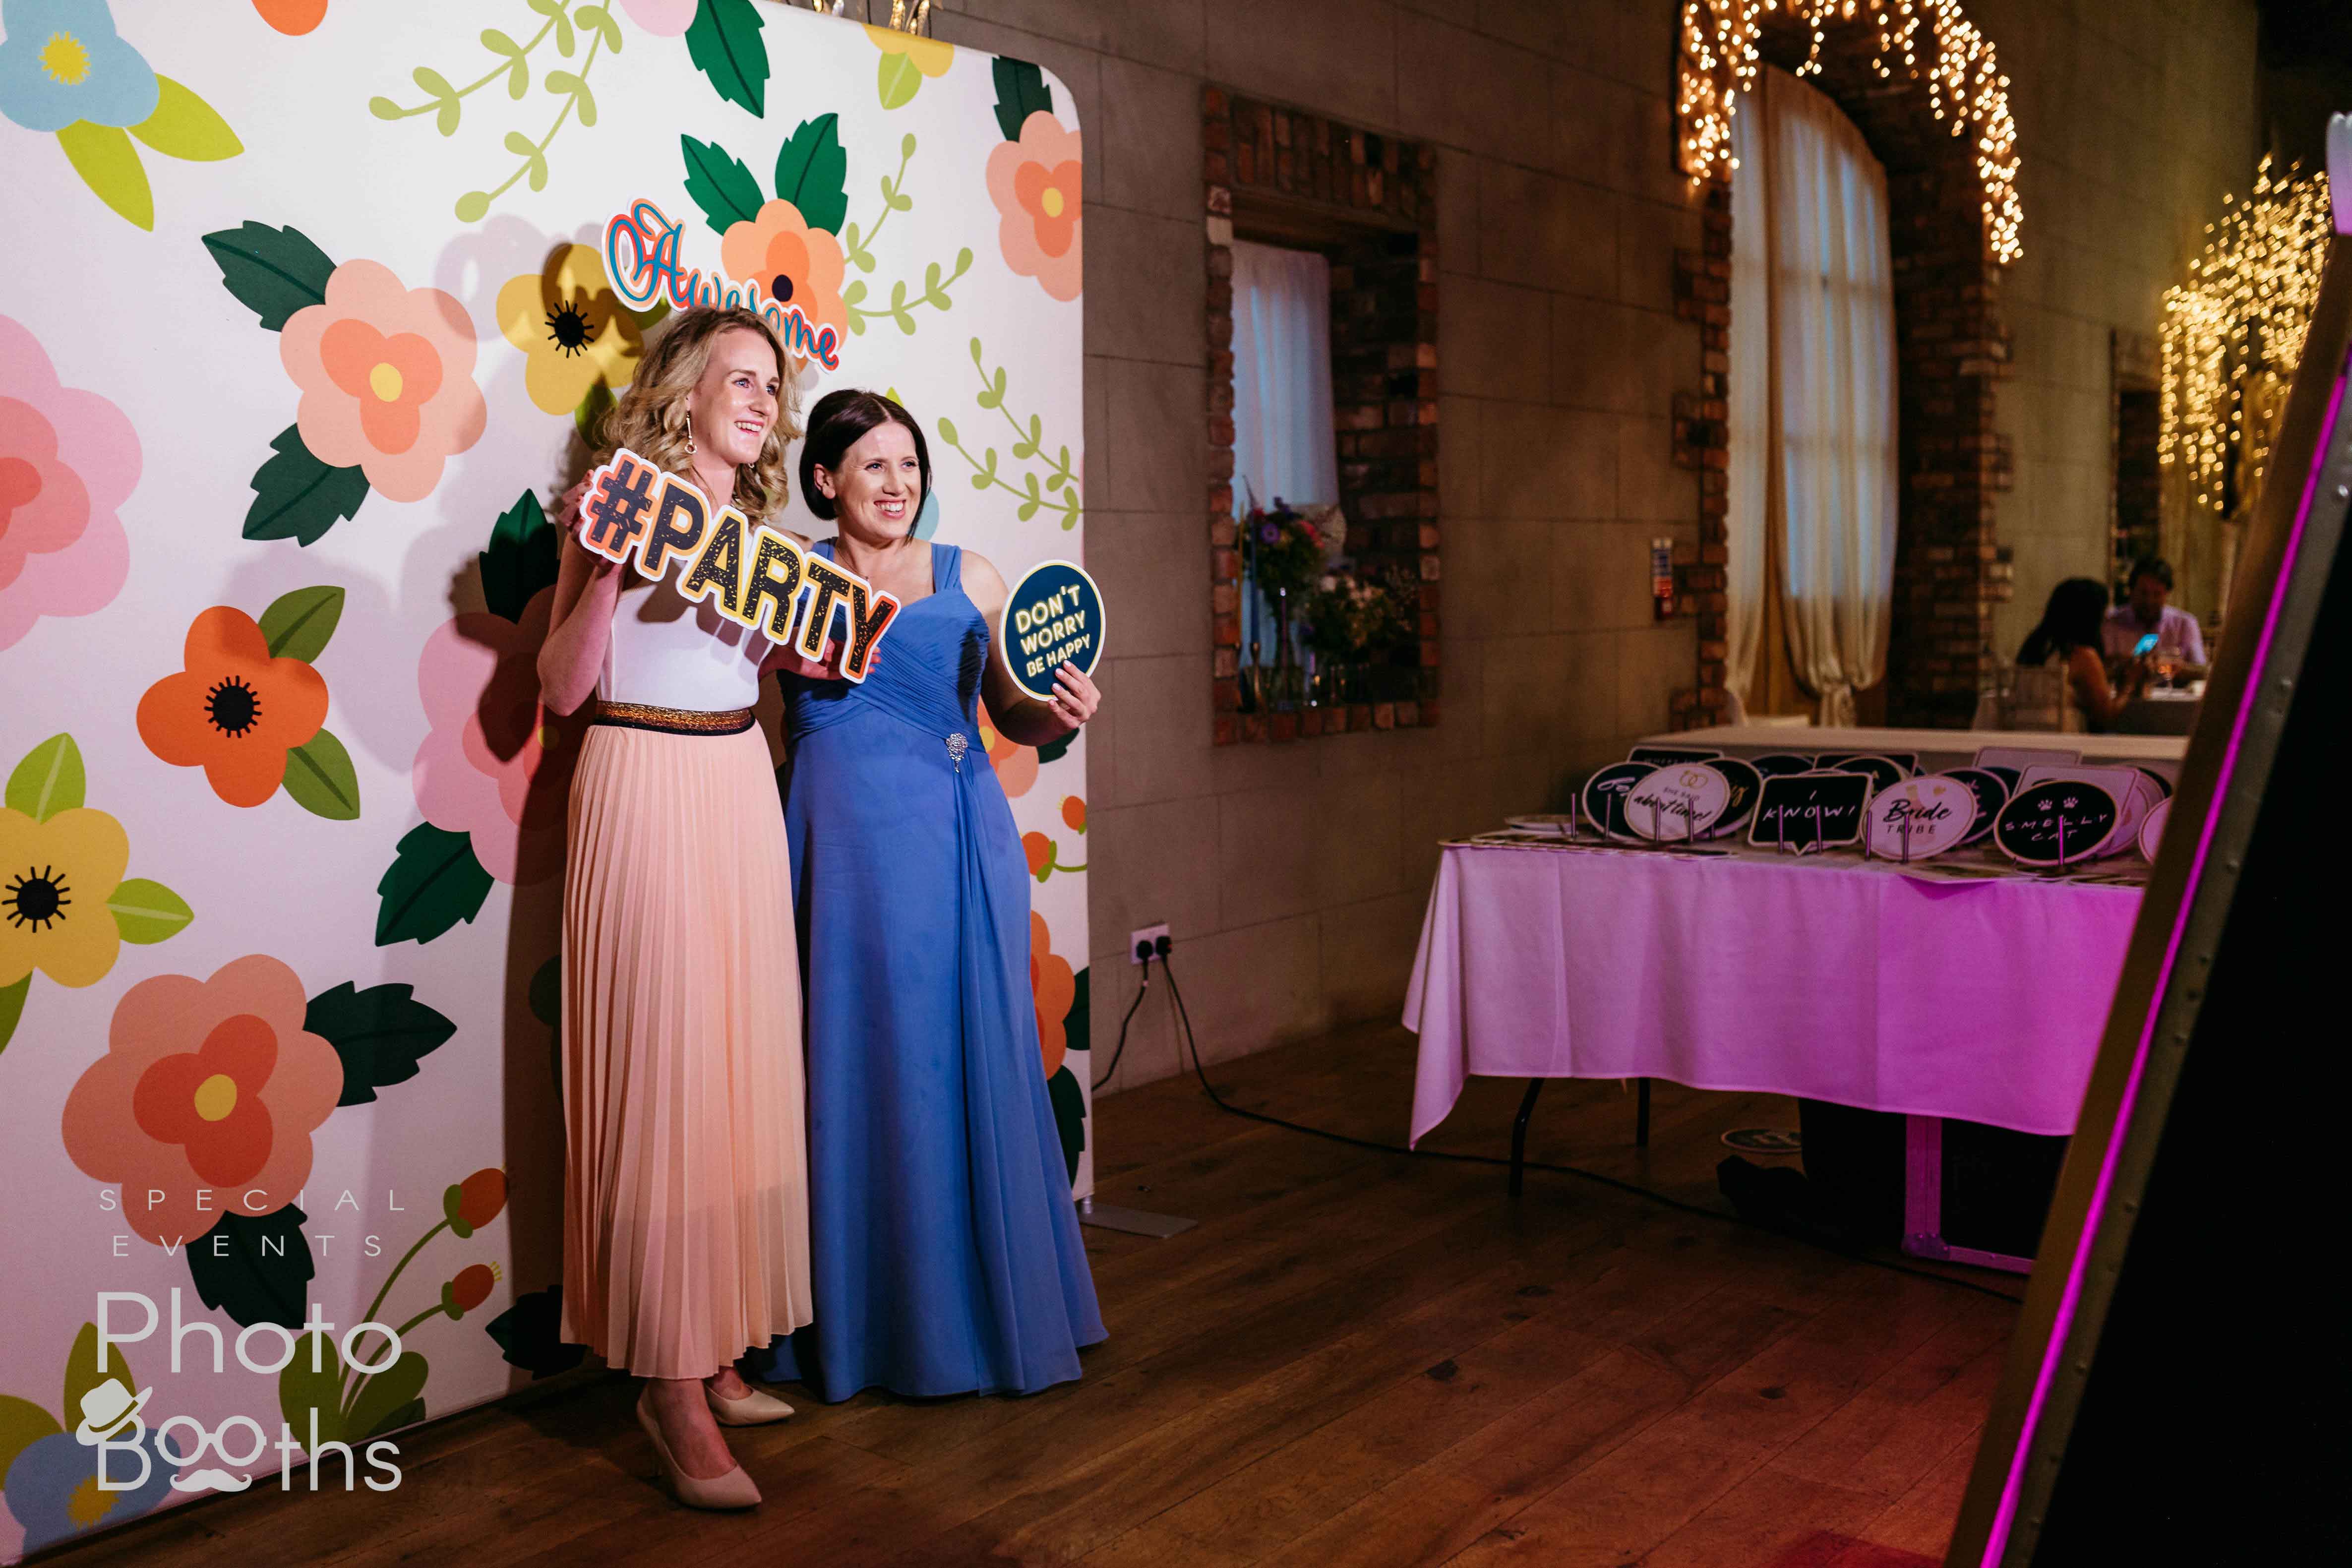 What is the Best Way to Make Your Party Memorable? Hire a Photo Booth in Birmingham!